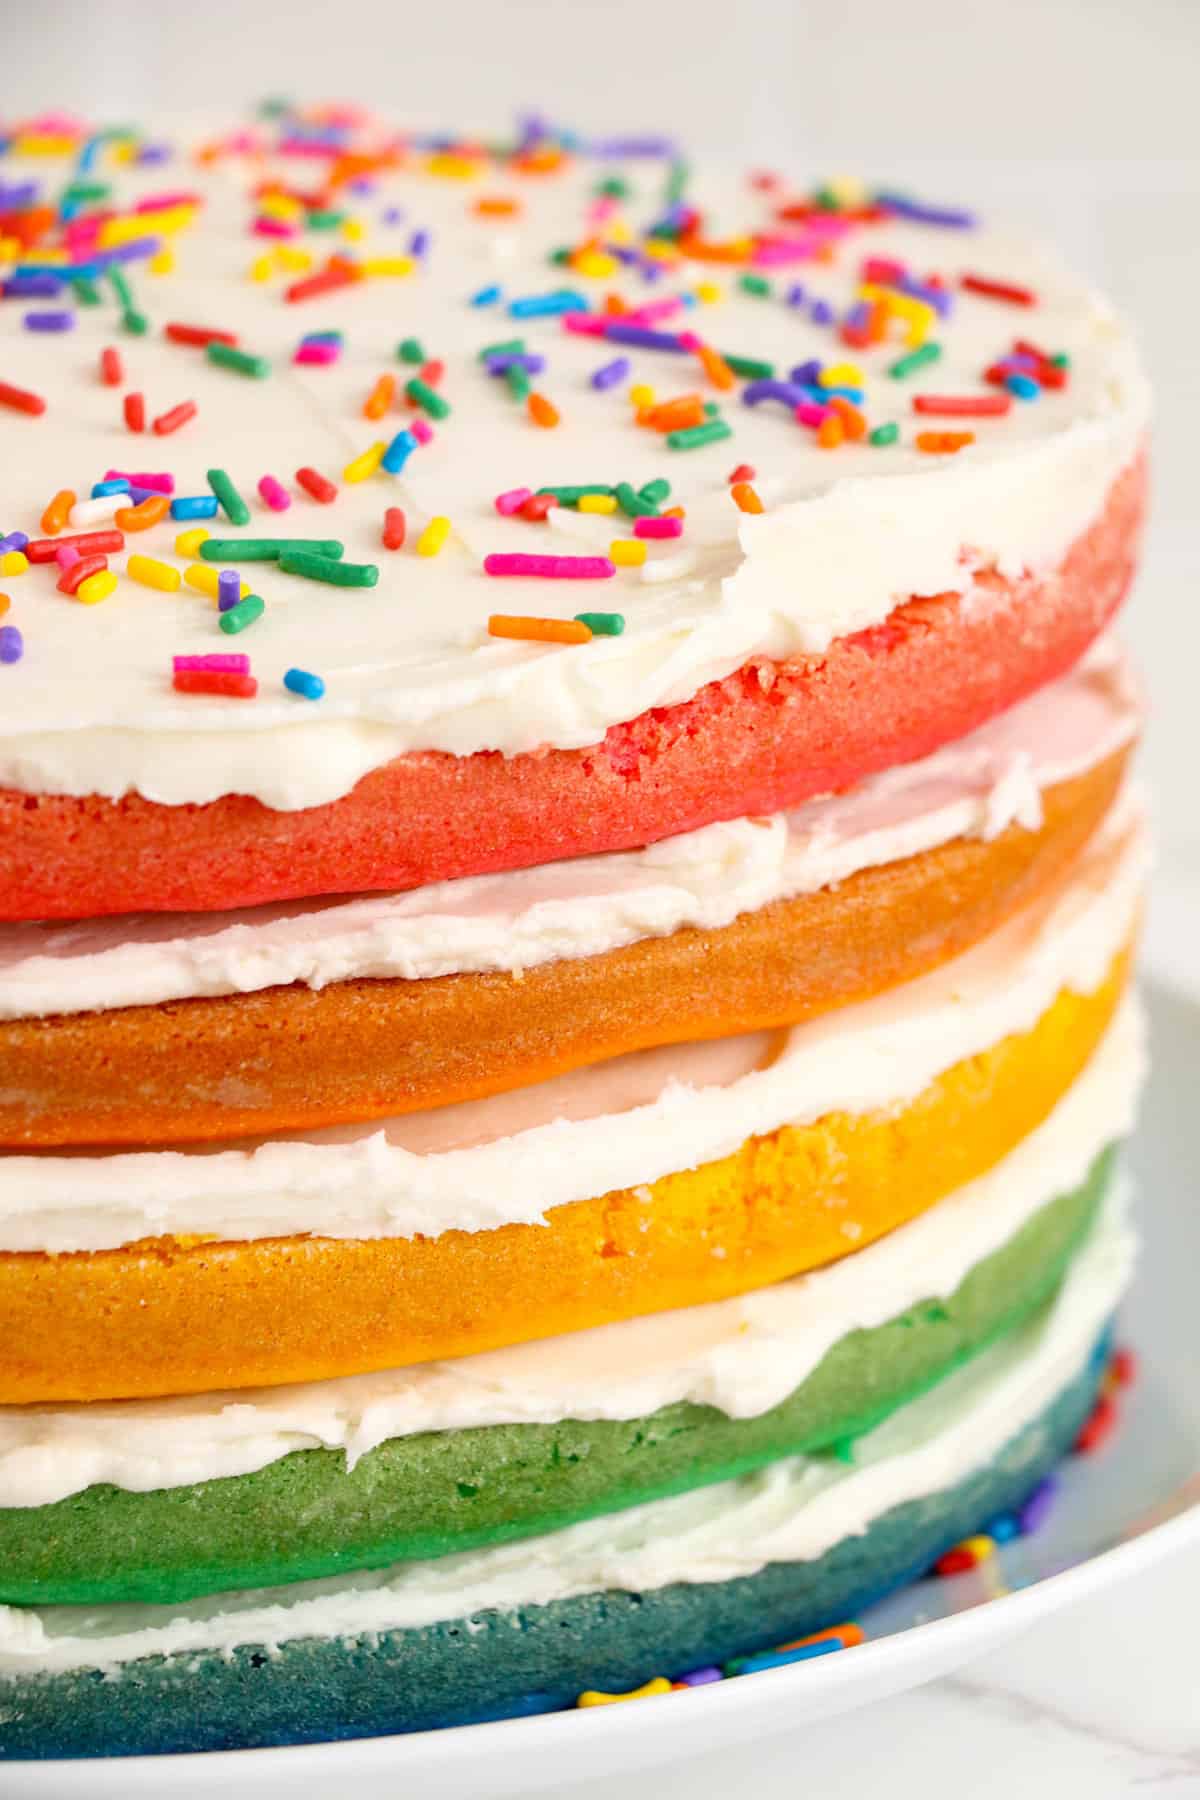 Add sprinkles of your choice on the top layer of frosting.